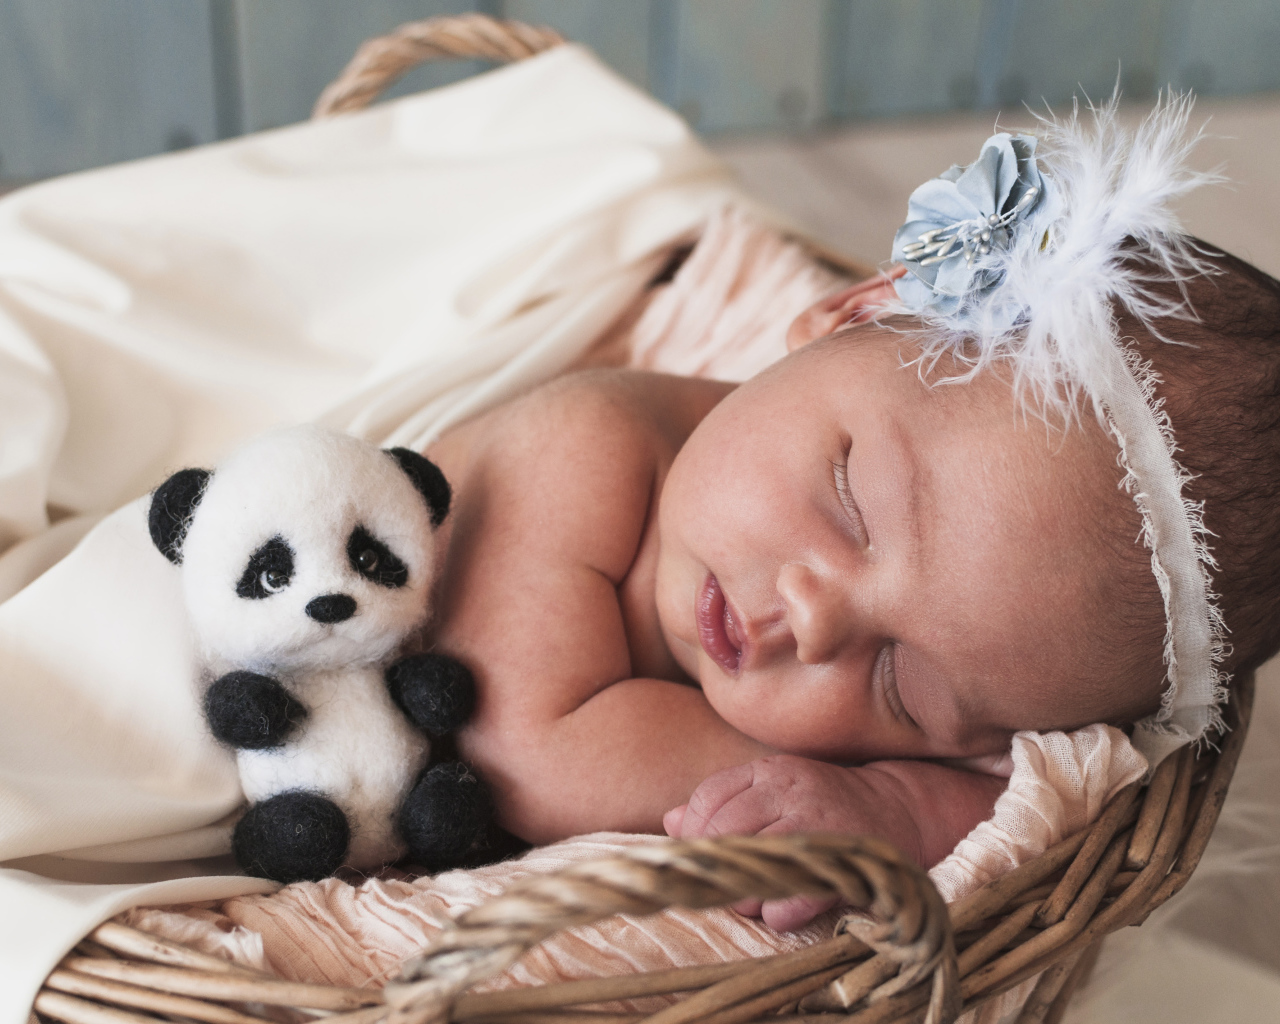 Little sleeping girl with a toy panda